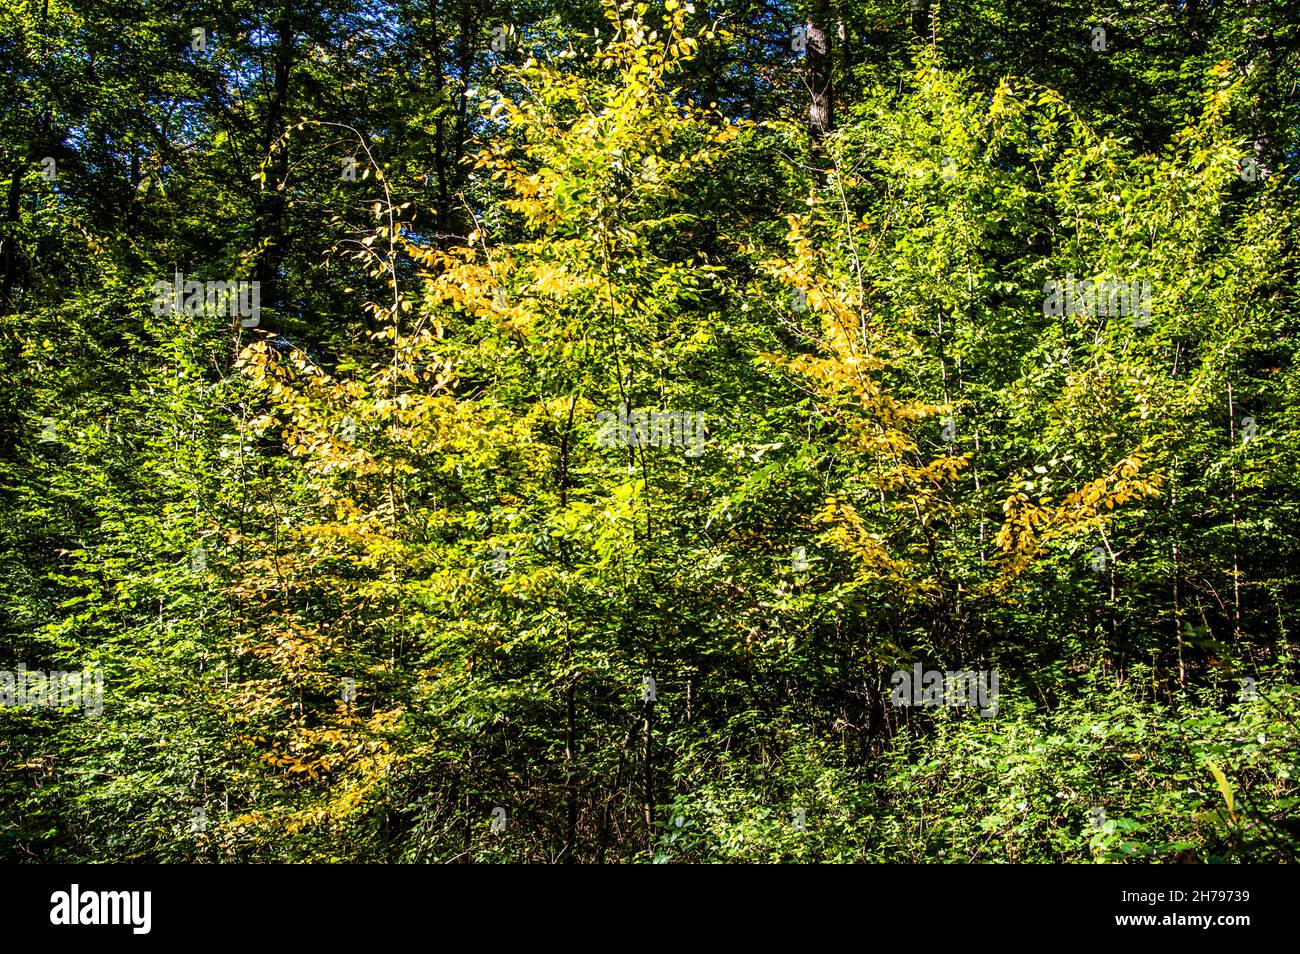 Wald Spaziergang Sonne, Wasser, Windrad Stock Photo